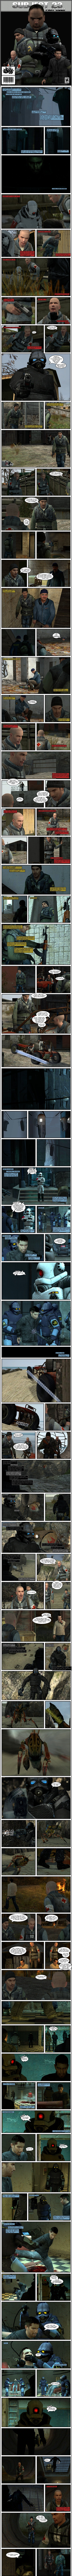 At the Combine facility of Nova Prospekt, a prisoner is thinking that he can't even remember how long he has been there. He recalls how he was used like a guinea pig and promises that however long it takes, he will have his revenge. The prisoner is Alex Jacobs, survivor of the Infection, last seen fighting a superpowered alien threat. At New Little Odessa, after the raid, Sullivan is inspecting the Combine elite soldier that was thrown next to him. He notes that the soldier has no marks on him and reasons that whatever hit him wasn't human. Just then, his fellow rebel is thrown at the wall. He turns around and realizes it is a Combine soldier. Sullivan goes for his gun but the soldier catches him off-guard. Wondering why he hasn't killed him already, Sullivan asks the soldier who the hell he is. The soldier in the black suit tells him there's something he should know about his one-eyed friend, meaning Jake. Elsewhere, Adrian is looking for Sullivan. He finds Sullivan alone and seemingly woozy. Adrian asks him if he's all right and tells him he's going to check in on Jake. Adrian goes into the basement and asks Odessa if he knows where Jake is. Odessa mentions he's probably still upstairs with Marcus and both go to check. They find Marcus' body but no sign of Jake. As Odessa checks in on Marcus, Adrian promises to himself that the Combine are going to pay for this. At the same time, Sullivan is thinking of what the Combine soldier told him and wondering if he can trust him. Adrian calls him from above and tells him he's going to need to take the buggy to rescue Jake and avenge Marcus. Sullivan realizes the Combine soldiers did come after Jake and goes to the garage, smiling when he sees his old ride. As Adrian reflects that they must have taken Jake to Nova Prospekt, he picks up Sullivan's old AK-47 assault rifle, which is rarely used due to the scarcity of ammunition. He figures it will do more damage to the Combine than their regular submachine guns and takes it with him. Outside, Sullivan is waiting on the buggy. He asks Adrian if he's sure about this and Adrian tells him of course. Sullivan tells him they have extra ammo on the buggy and to hop in. They drive off. At Nova Prospekt, the prisoner pod containing Jacobs is taken to a Combine elite soldier. The elite soldier tells Jacobs he's lucky their benefactors have a use for his genetic information and calls him a traitor. Jacobs thinks of what he would like to reply, but notes that he is not in total control of himself anymore and wonders if he is really insane. A Combine console declares that danger levels are rising and the elite orders Jacobs be knocked out. As he passes away, Jacobs thinks to himself that he remembers pain all too well. On the Coast, Sullivan drives the buggy to an old sewer tunnel and stops. Adrian asks if that's his shortcut and Sullivan suggests they move before the antlions come. Close by, the black suit Combine soldier is making his own way to Nova Prospekt while his scanner asks why he spared that human. The scanner notes that emotion is unneeded but the soldier tells it not to worry. The soldier then asks how much time he still has and the scanner notes the termination protocols will activate within the next twenty-four hours, adding that the traitor has been released and they may try using him to stop the soldier. They spot Sullivan and Adrian and the scanner recommends their termination, but the soldier says they may prove useful as a distraction. Unaware they are being watched, Sullivan tells Adrian they are close to the vortigaunt camp. A refugee shows up at the door to the camp and tells them to come in, as two antlion guards have been fighting for territory lately. Listening in, the soldier asks the scanner how many antlion guards it is detecting and the scanner replies only one. The soldier reasons that it will be quick and drops down. Just as the massive antlion guard burrows out and charges at him, the soldier tells it not to waste his time and kills it with a few shots, then moves on. At the camp, Adrian and Sullivan keep moving, debating whether taking the coast is suicide. Sullivan thanks the refugee for his help and asks him for directions. He tells them to use the pipes outside, which, if they're lucky, will be unguarded. Sullivan tells Adrian let's go. At Nova Prospekt, the Combine are taking Jacobs to a torture chair. The elite soldier orders him to sit down and Jacobs replies make me. Two soldiers approach with stun batons but Jacobs fights back, only to get distracted and injected in the neck with a tranquilizer. The Combine soldiers drag him to the chair and the elite soldier orders them to begin the procedure. At the Nova Prospekt sewer pipes, Sullivan spots the mysterious Combine soldier killing a Nova Prospekt guard and notes that he really is against the Combine. Adrian approaches and tells Sullivan he's found a door. They check if it's clear and move in.